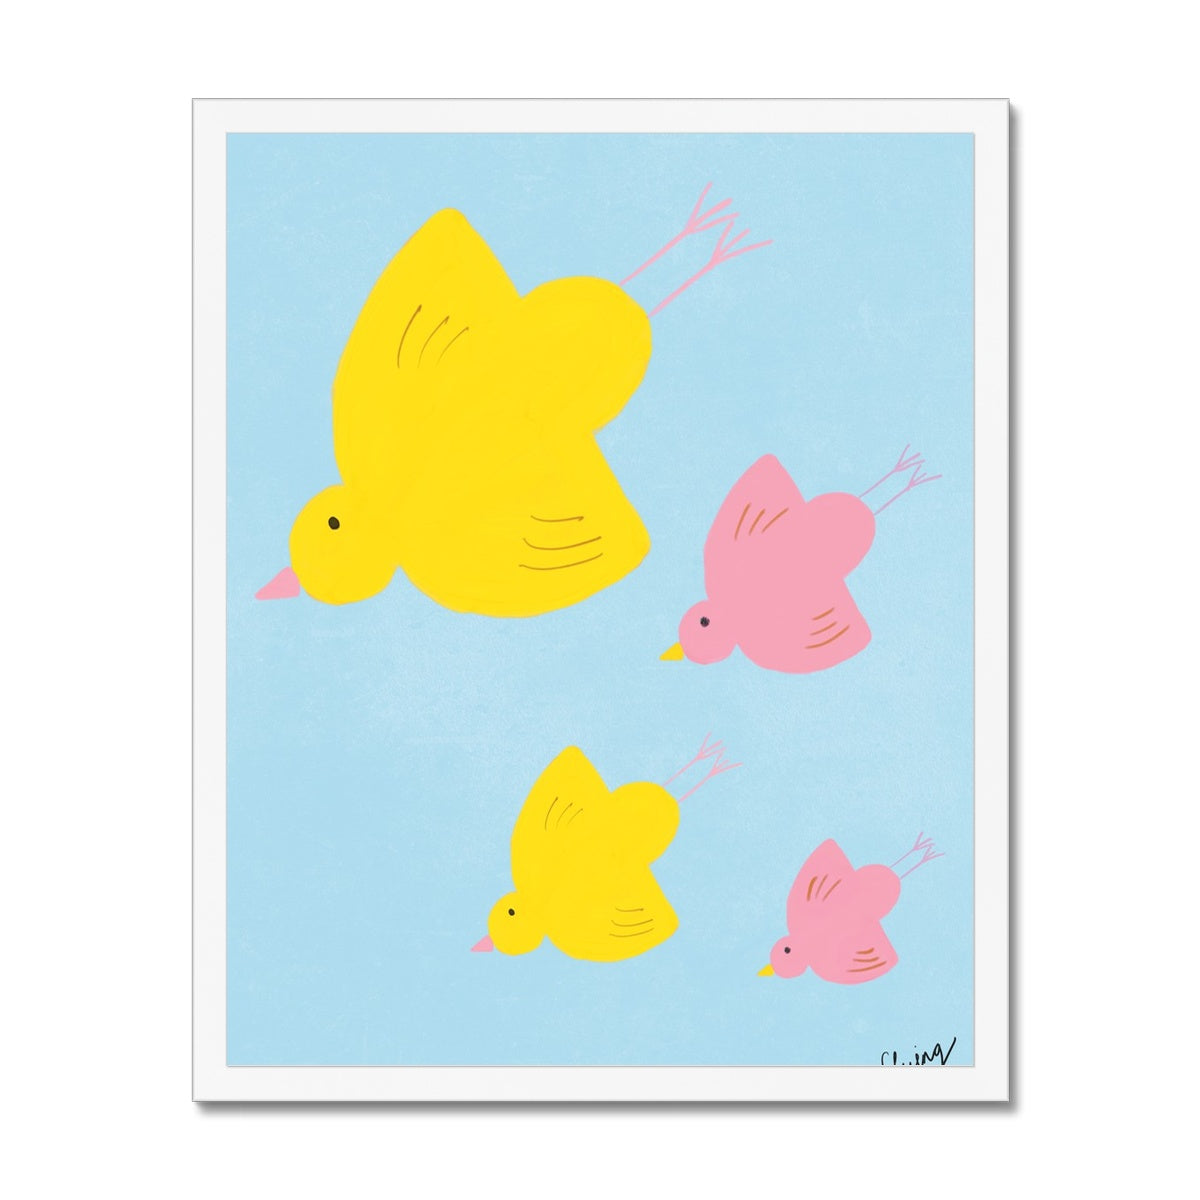 Flying Birds - Blue, Yellow and Pink Art Print Framed Print